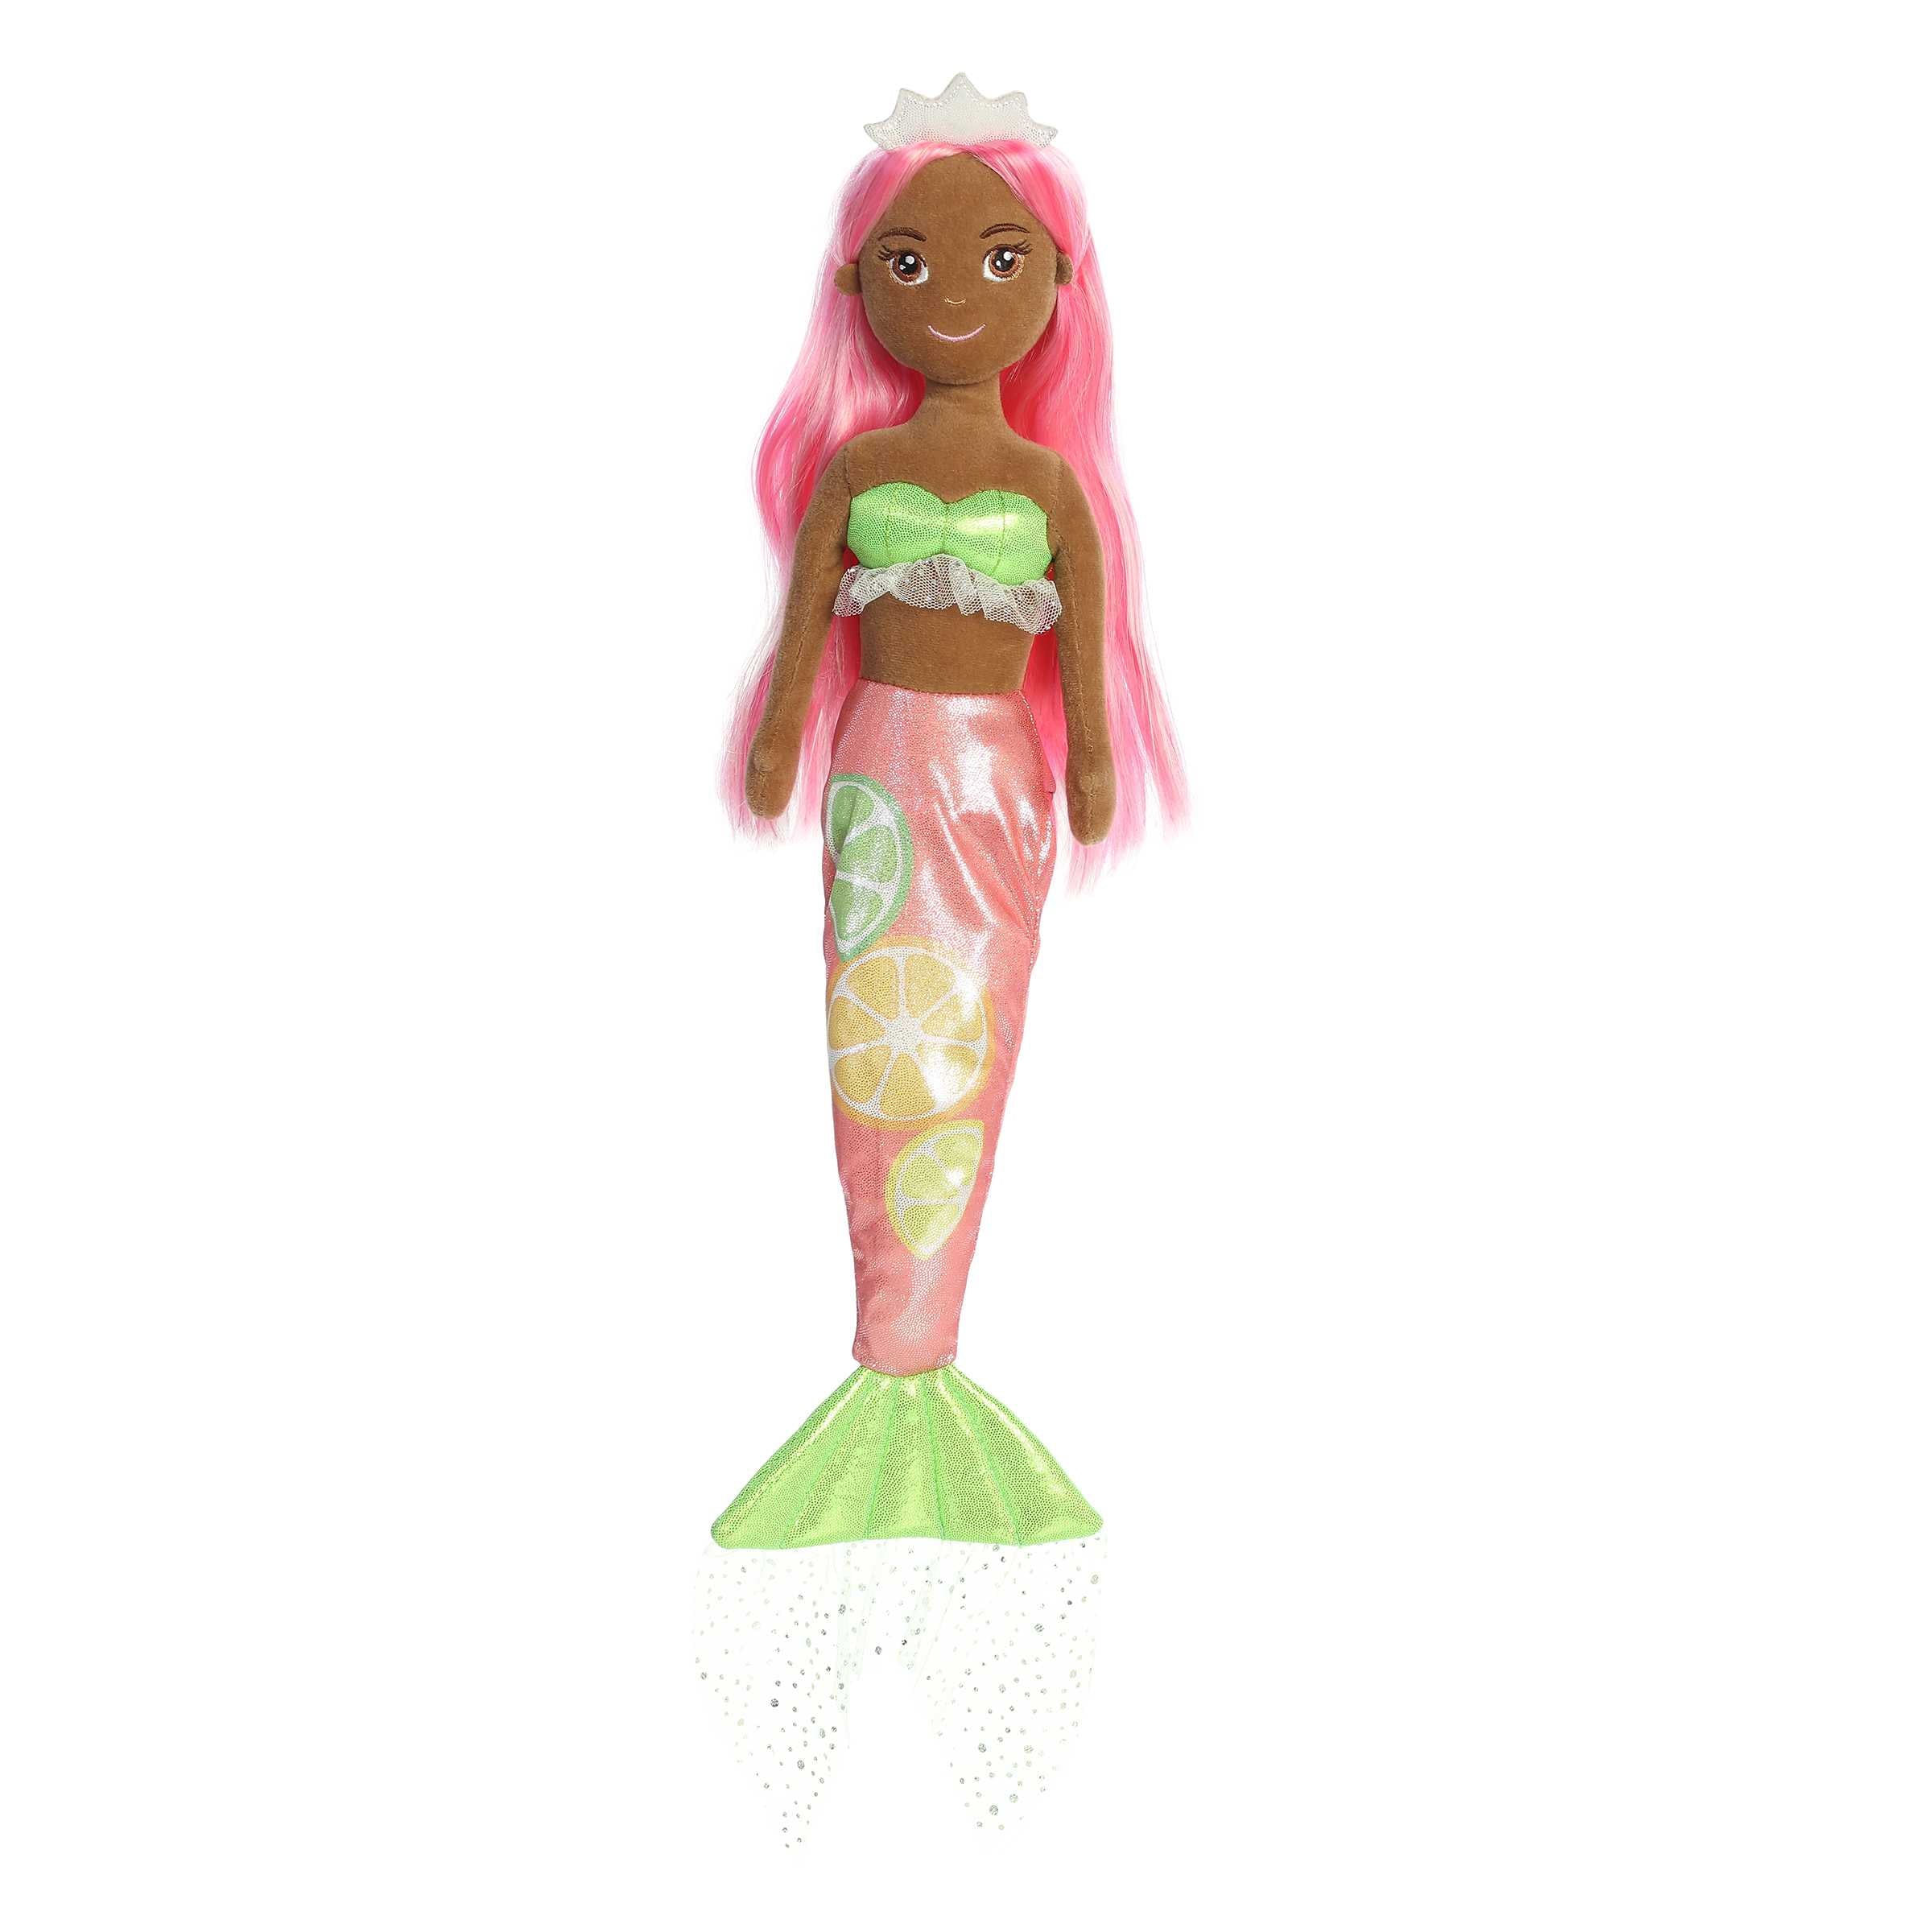 Pink-haired Olivia Orange mermaid plush with an orange tail, ideal for lively play and vibrant decor.